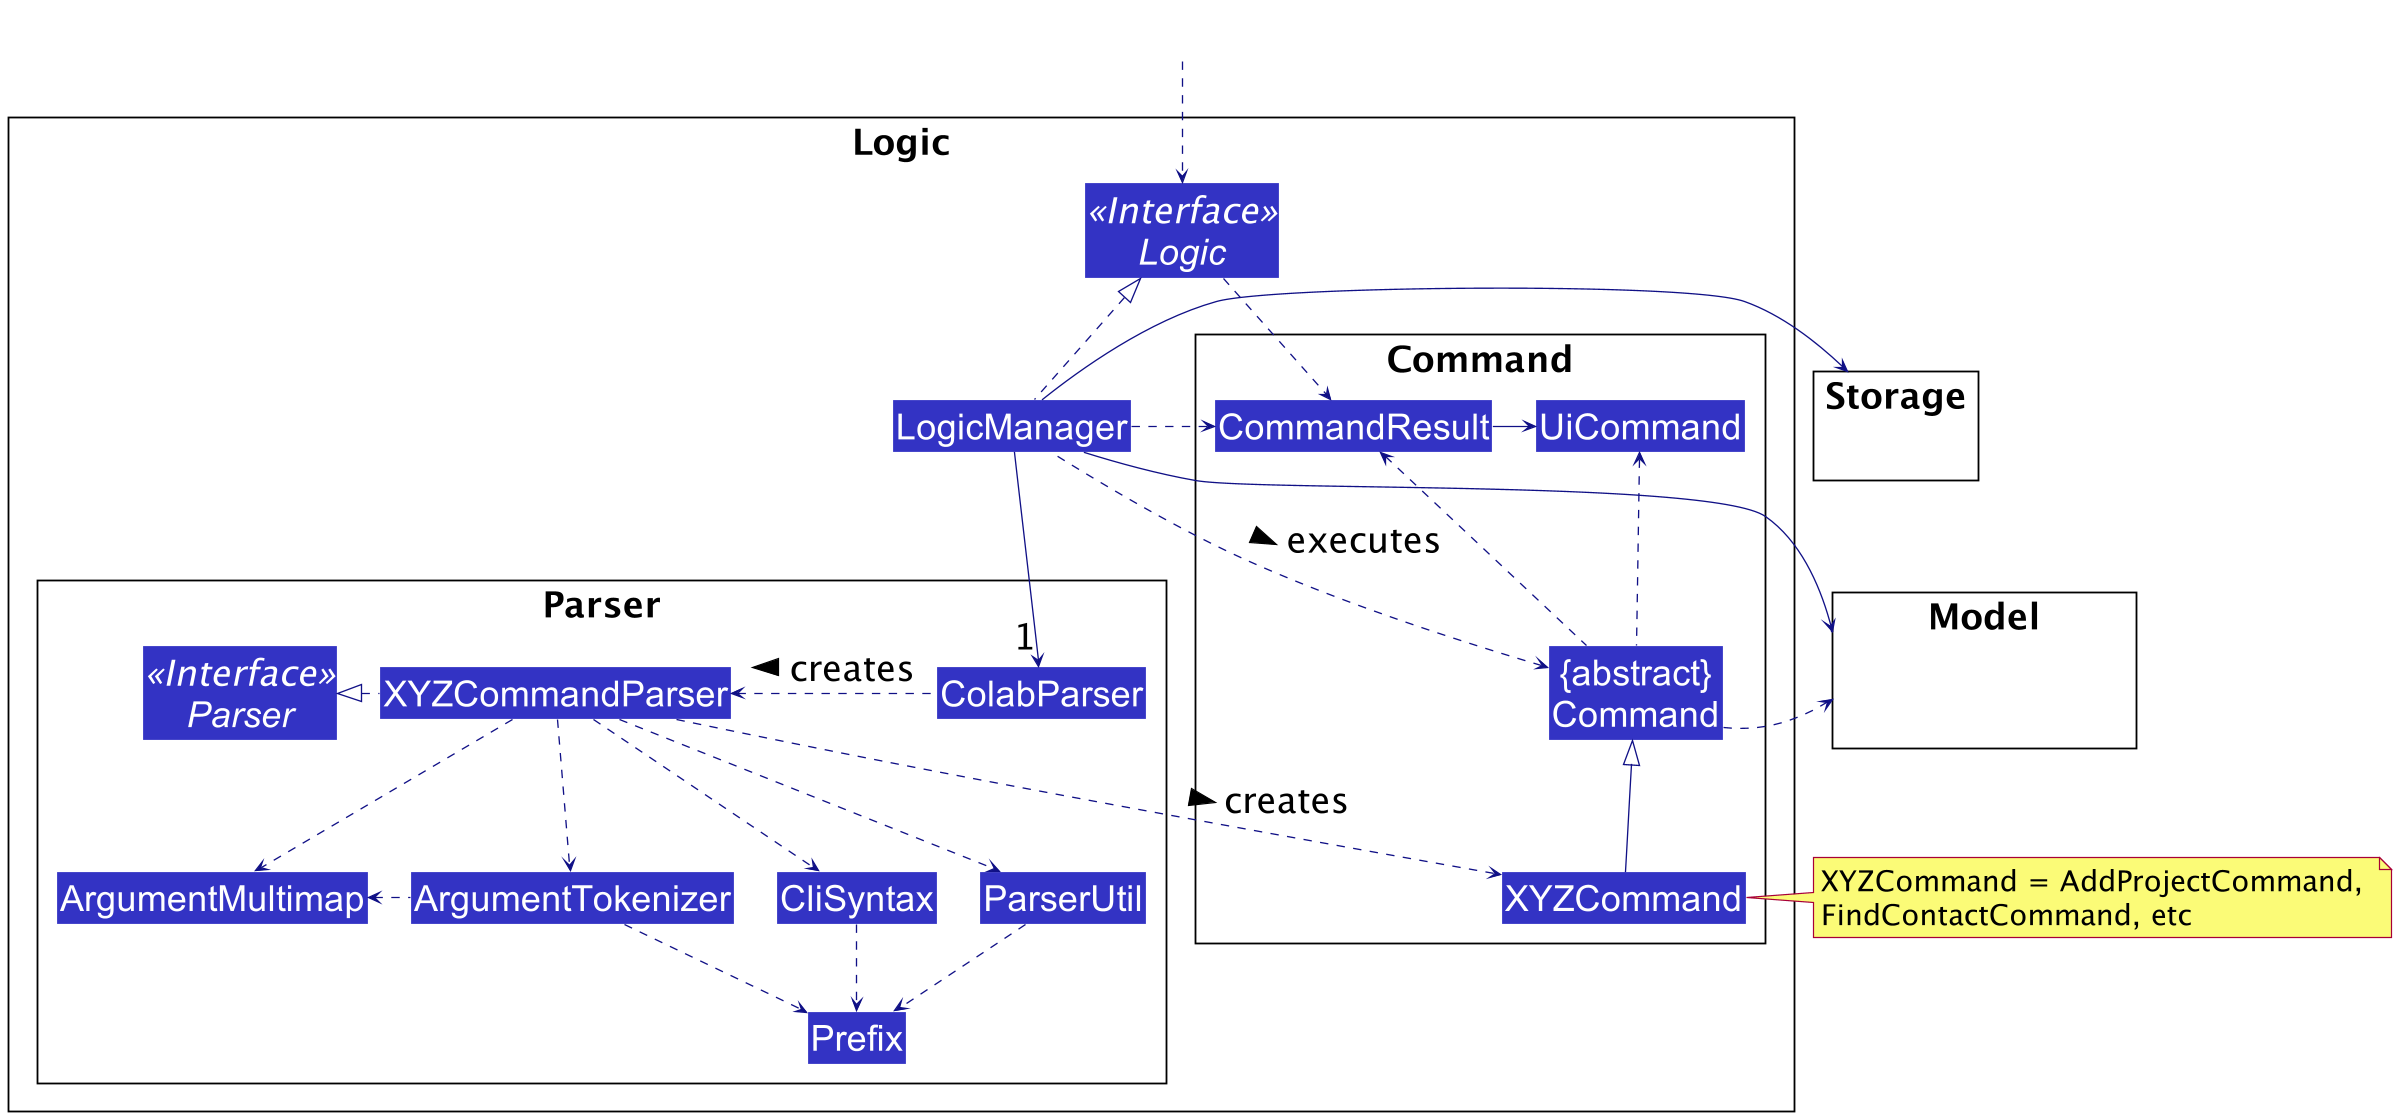 Class Diagram of the Logic Component